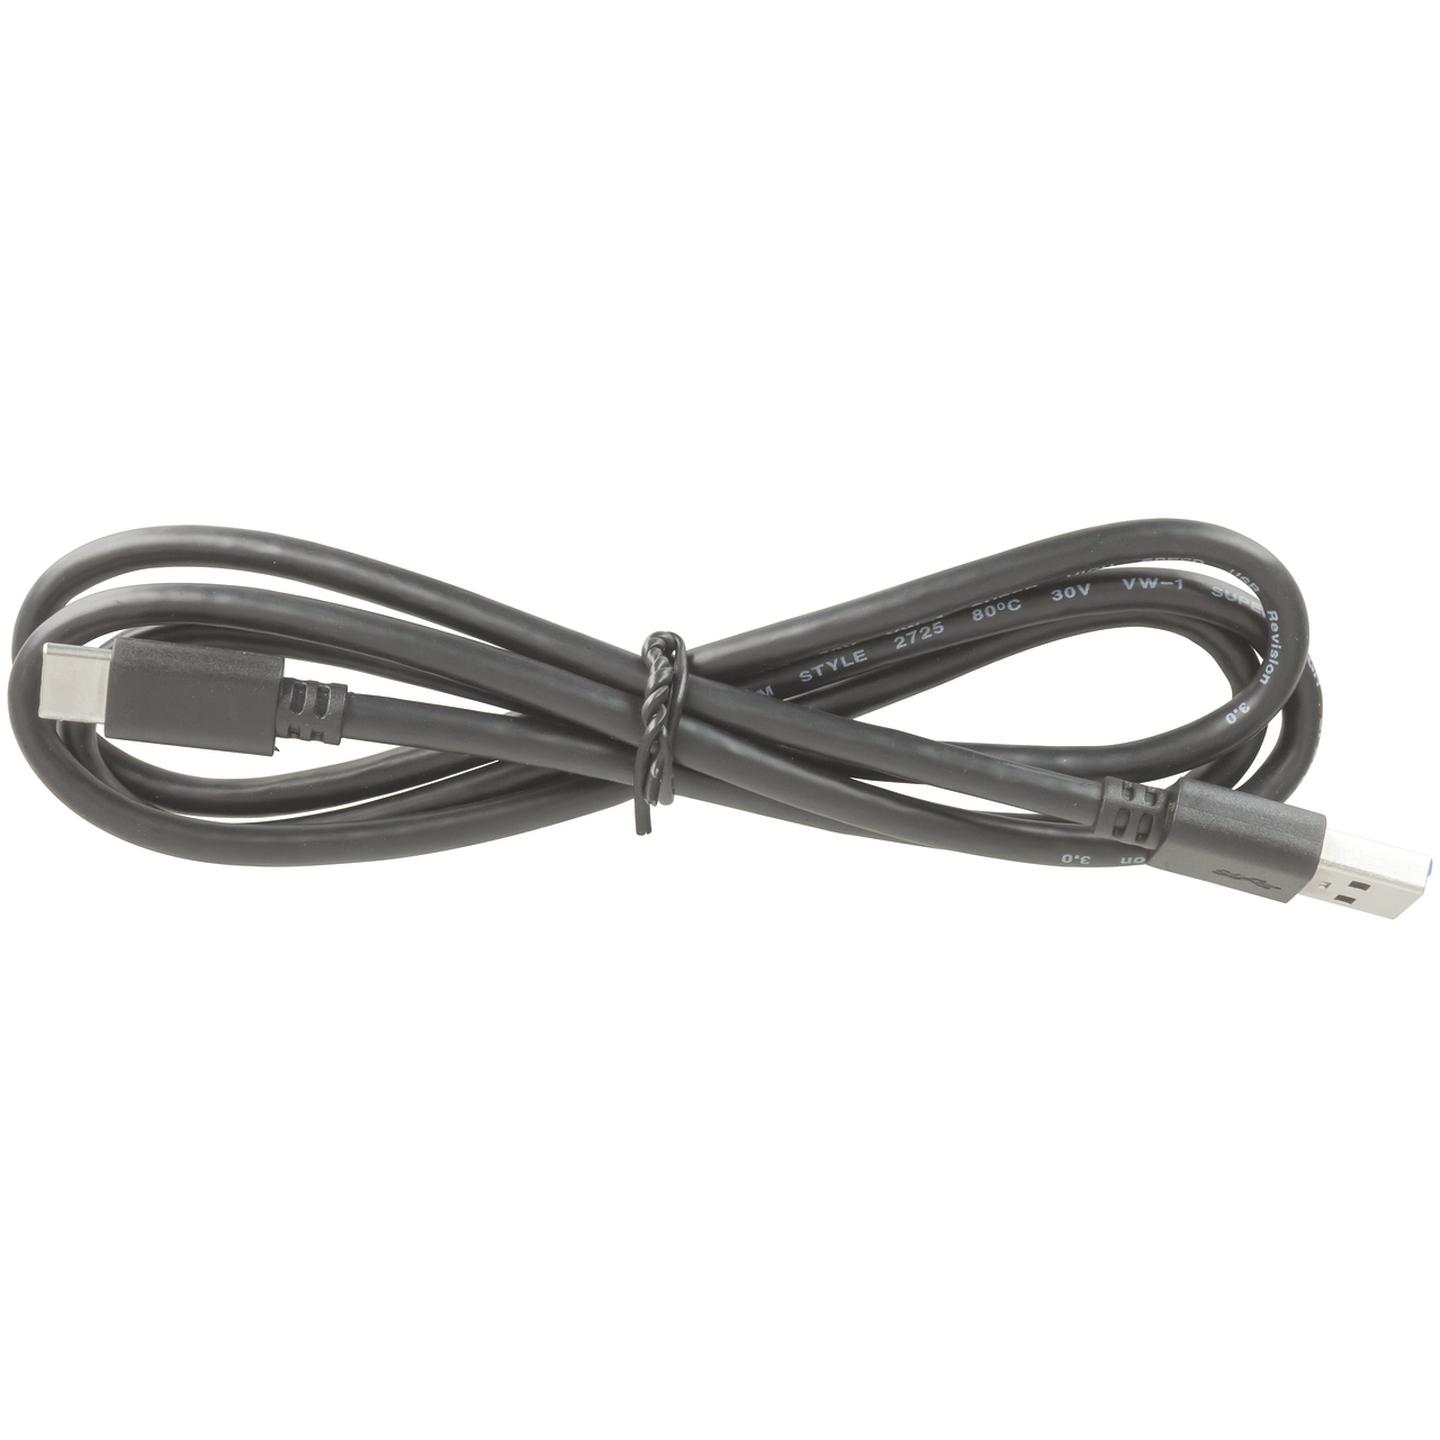 USB Type C to USB 3.0 A Male Cable 1m